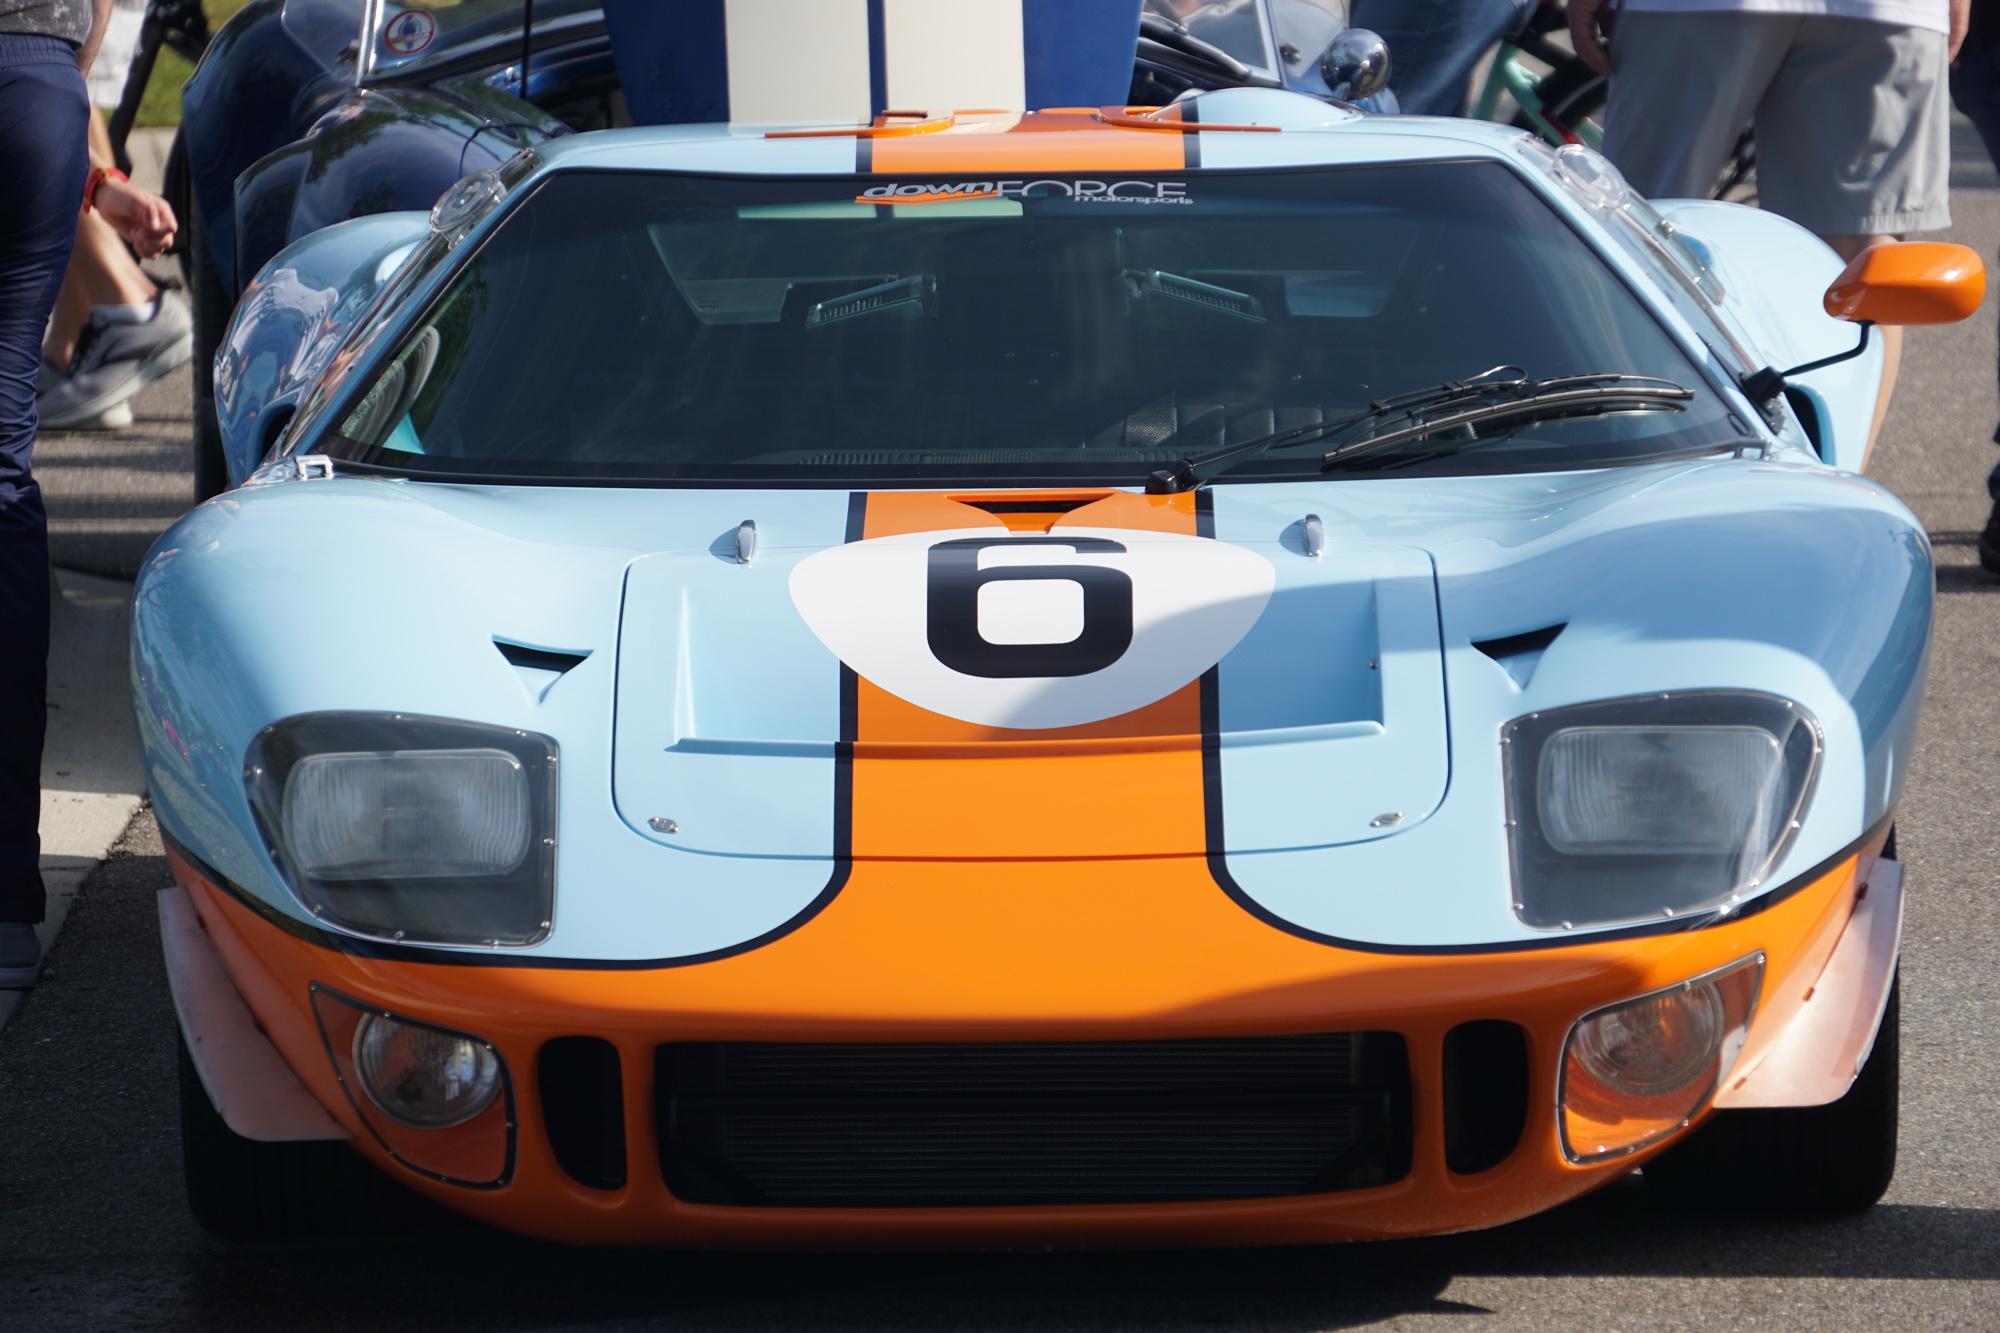 A Ford GT in the colors of the 24 Hours of LeMans champion Ford GT40 from 1968 and 1969